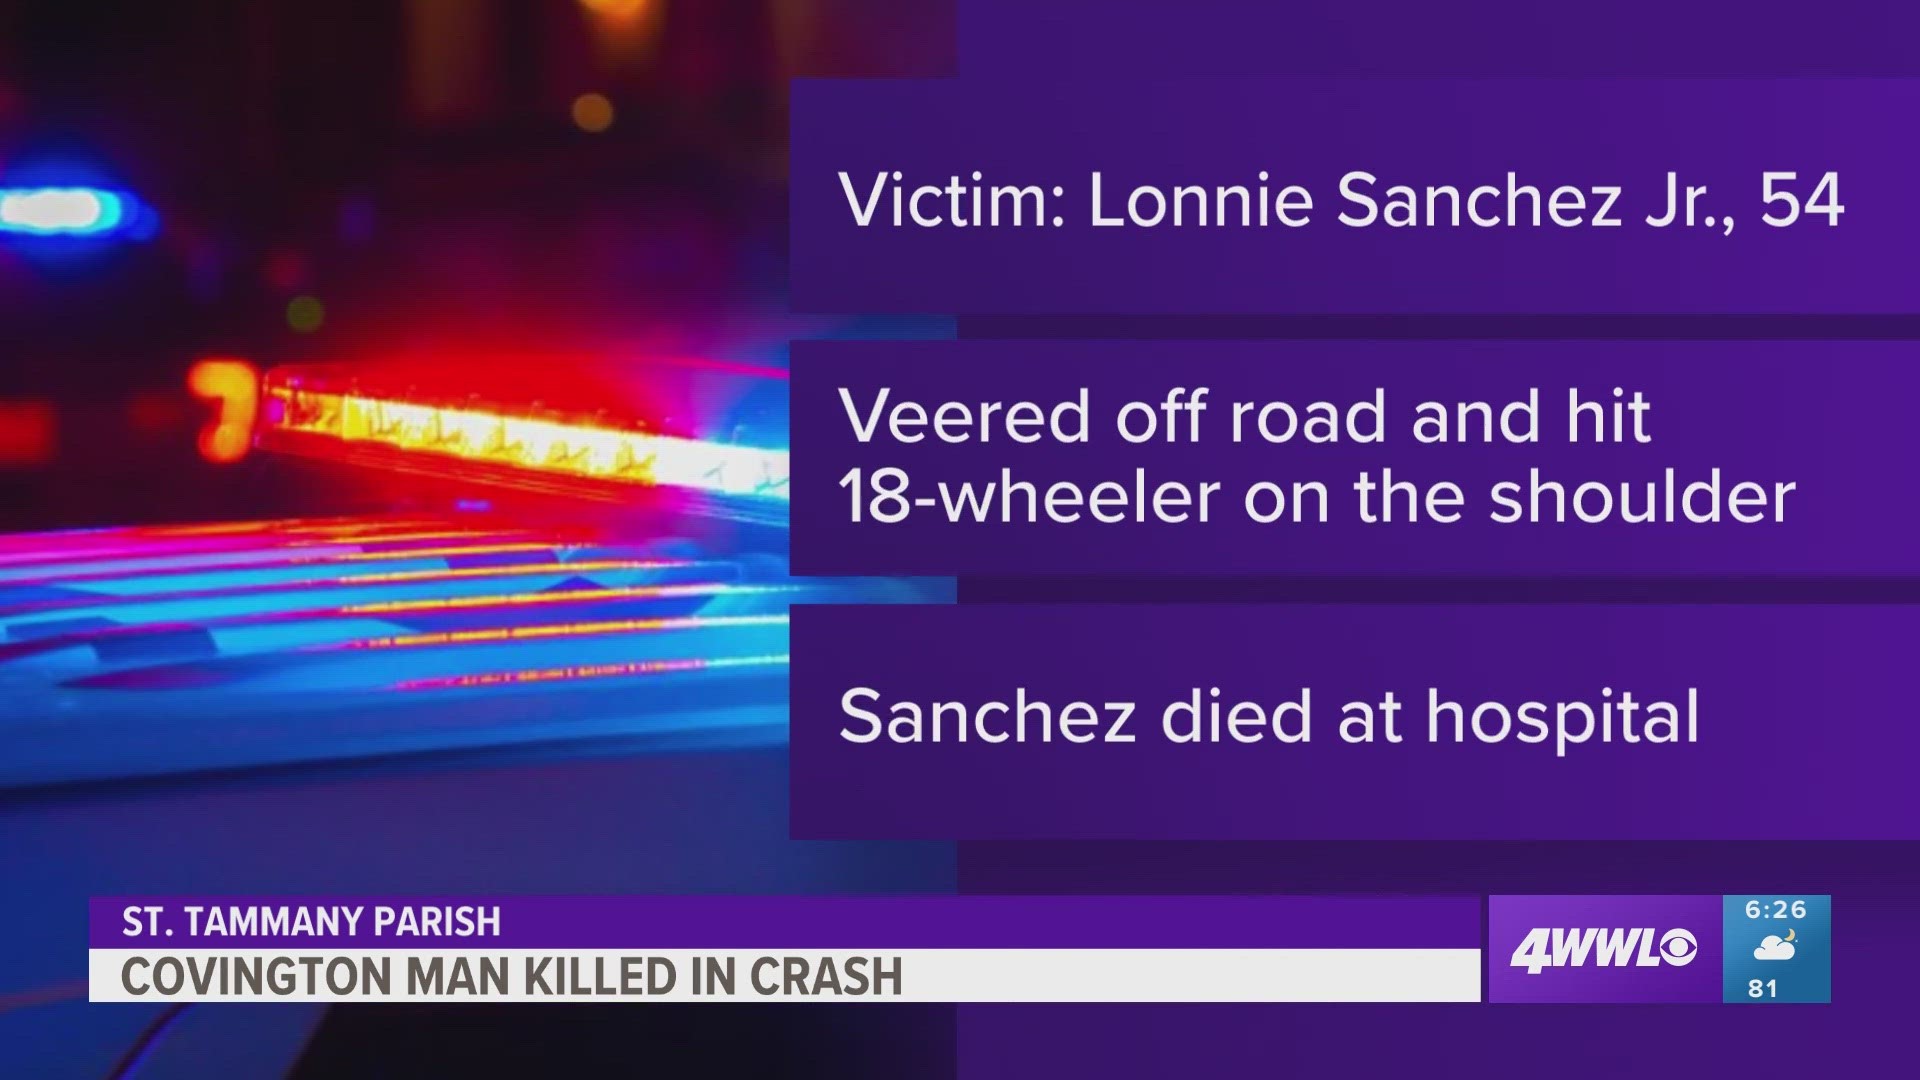 State police said 54-year-old Lonnie Sanchez Jr. was killed and later died at the hospital.